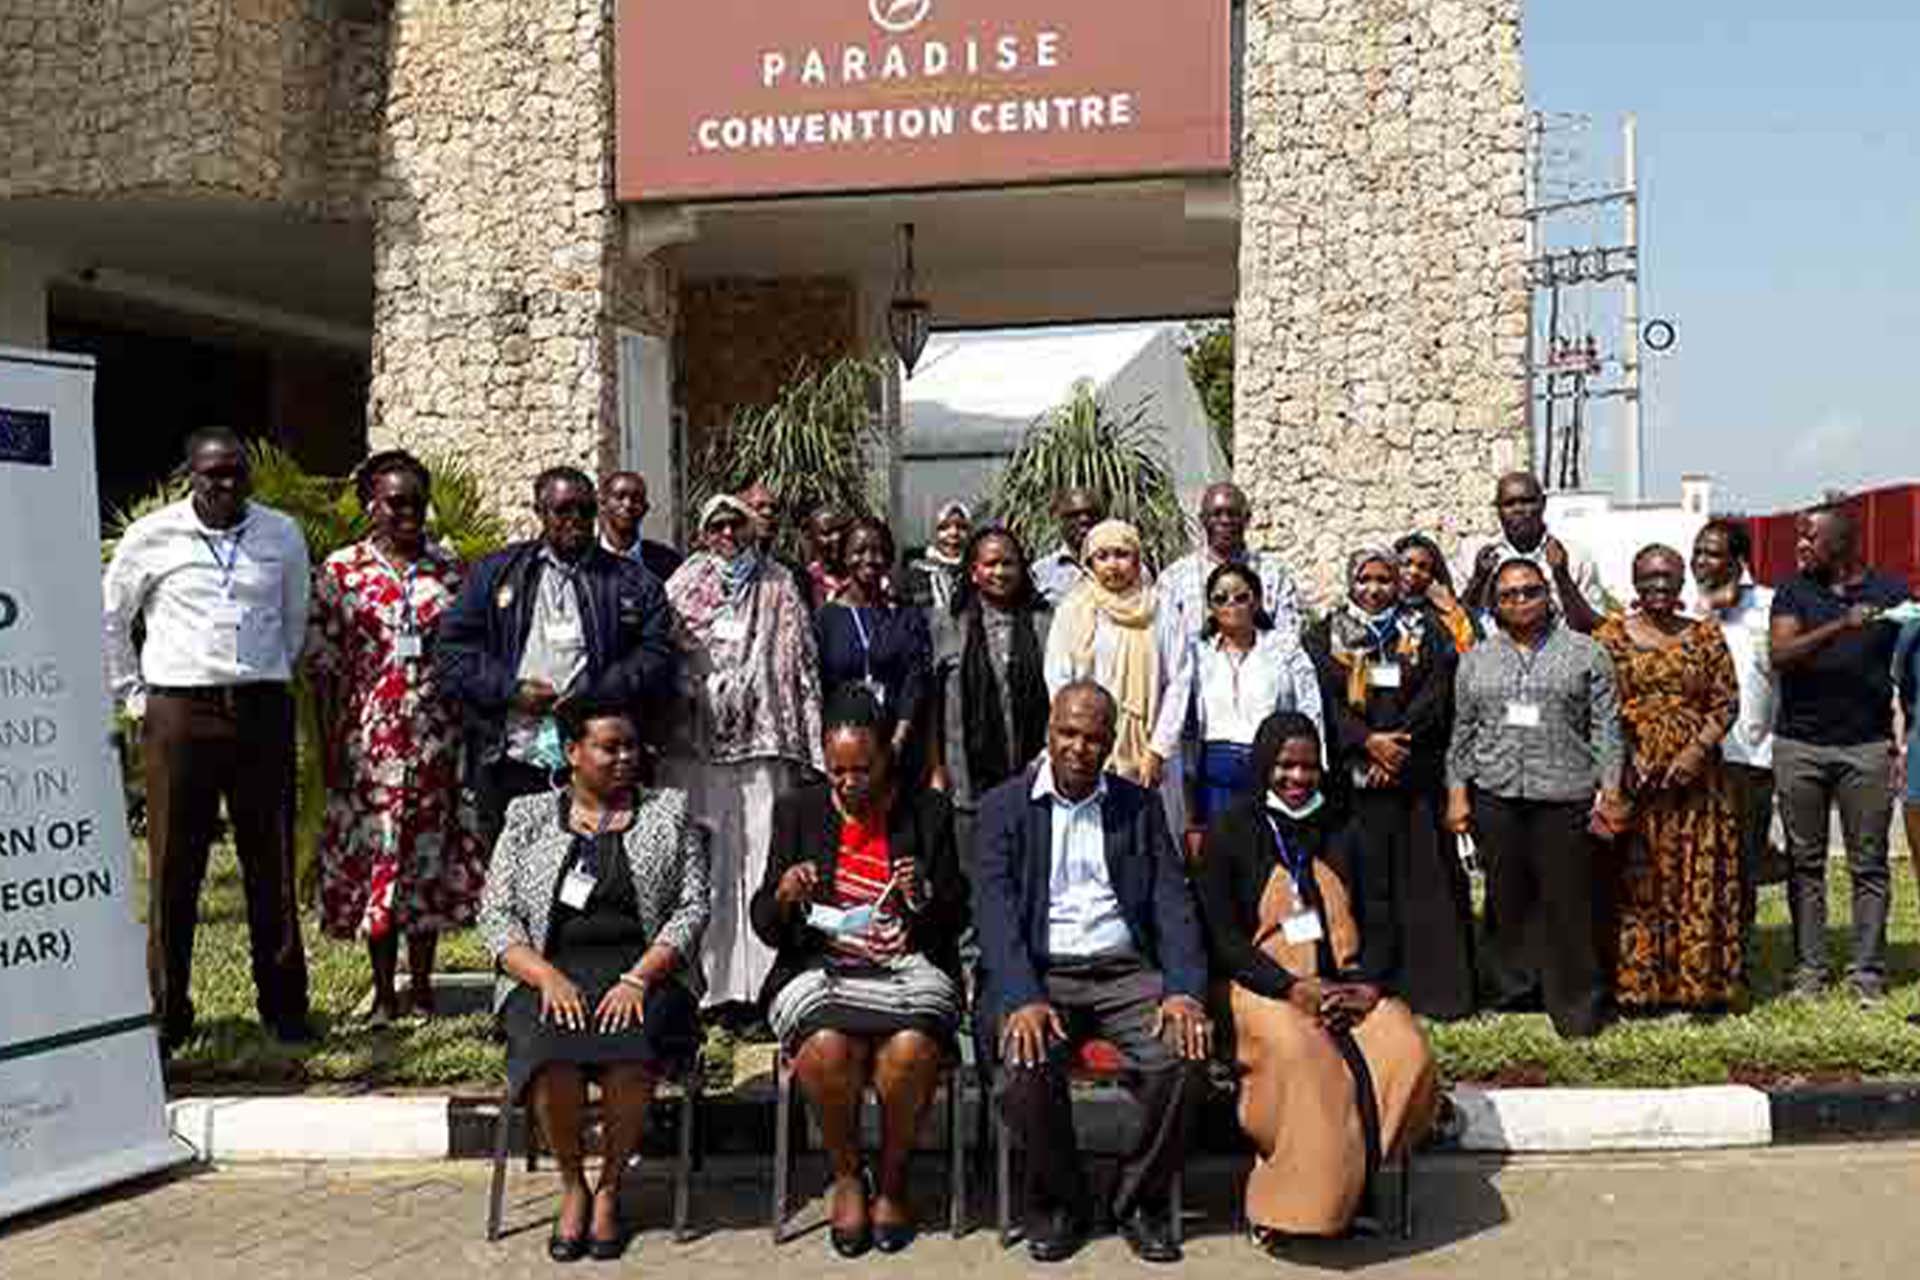 IGAD Security Sector Program (IGAD SSP) Convene National Workshop On Women’s Rights In Counter-Terrorism Policies And Strategies In Mombasa